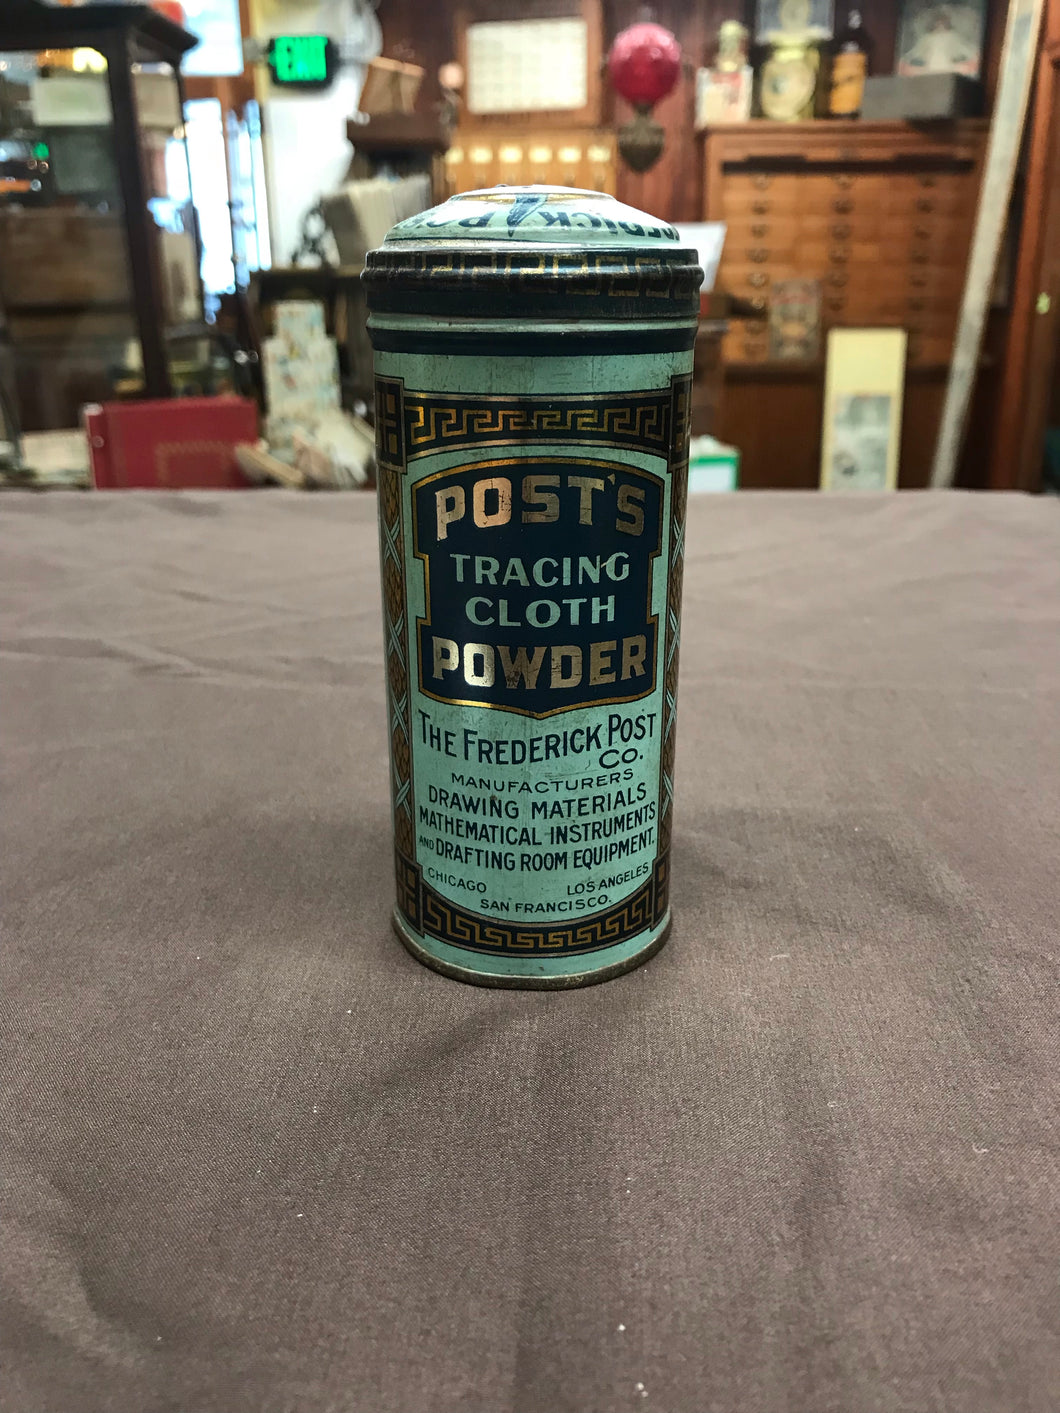 Vintage Post’s Tracing Cloth Powder with Original Powder Inside by The Fredrick Post Company